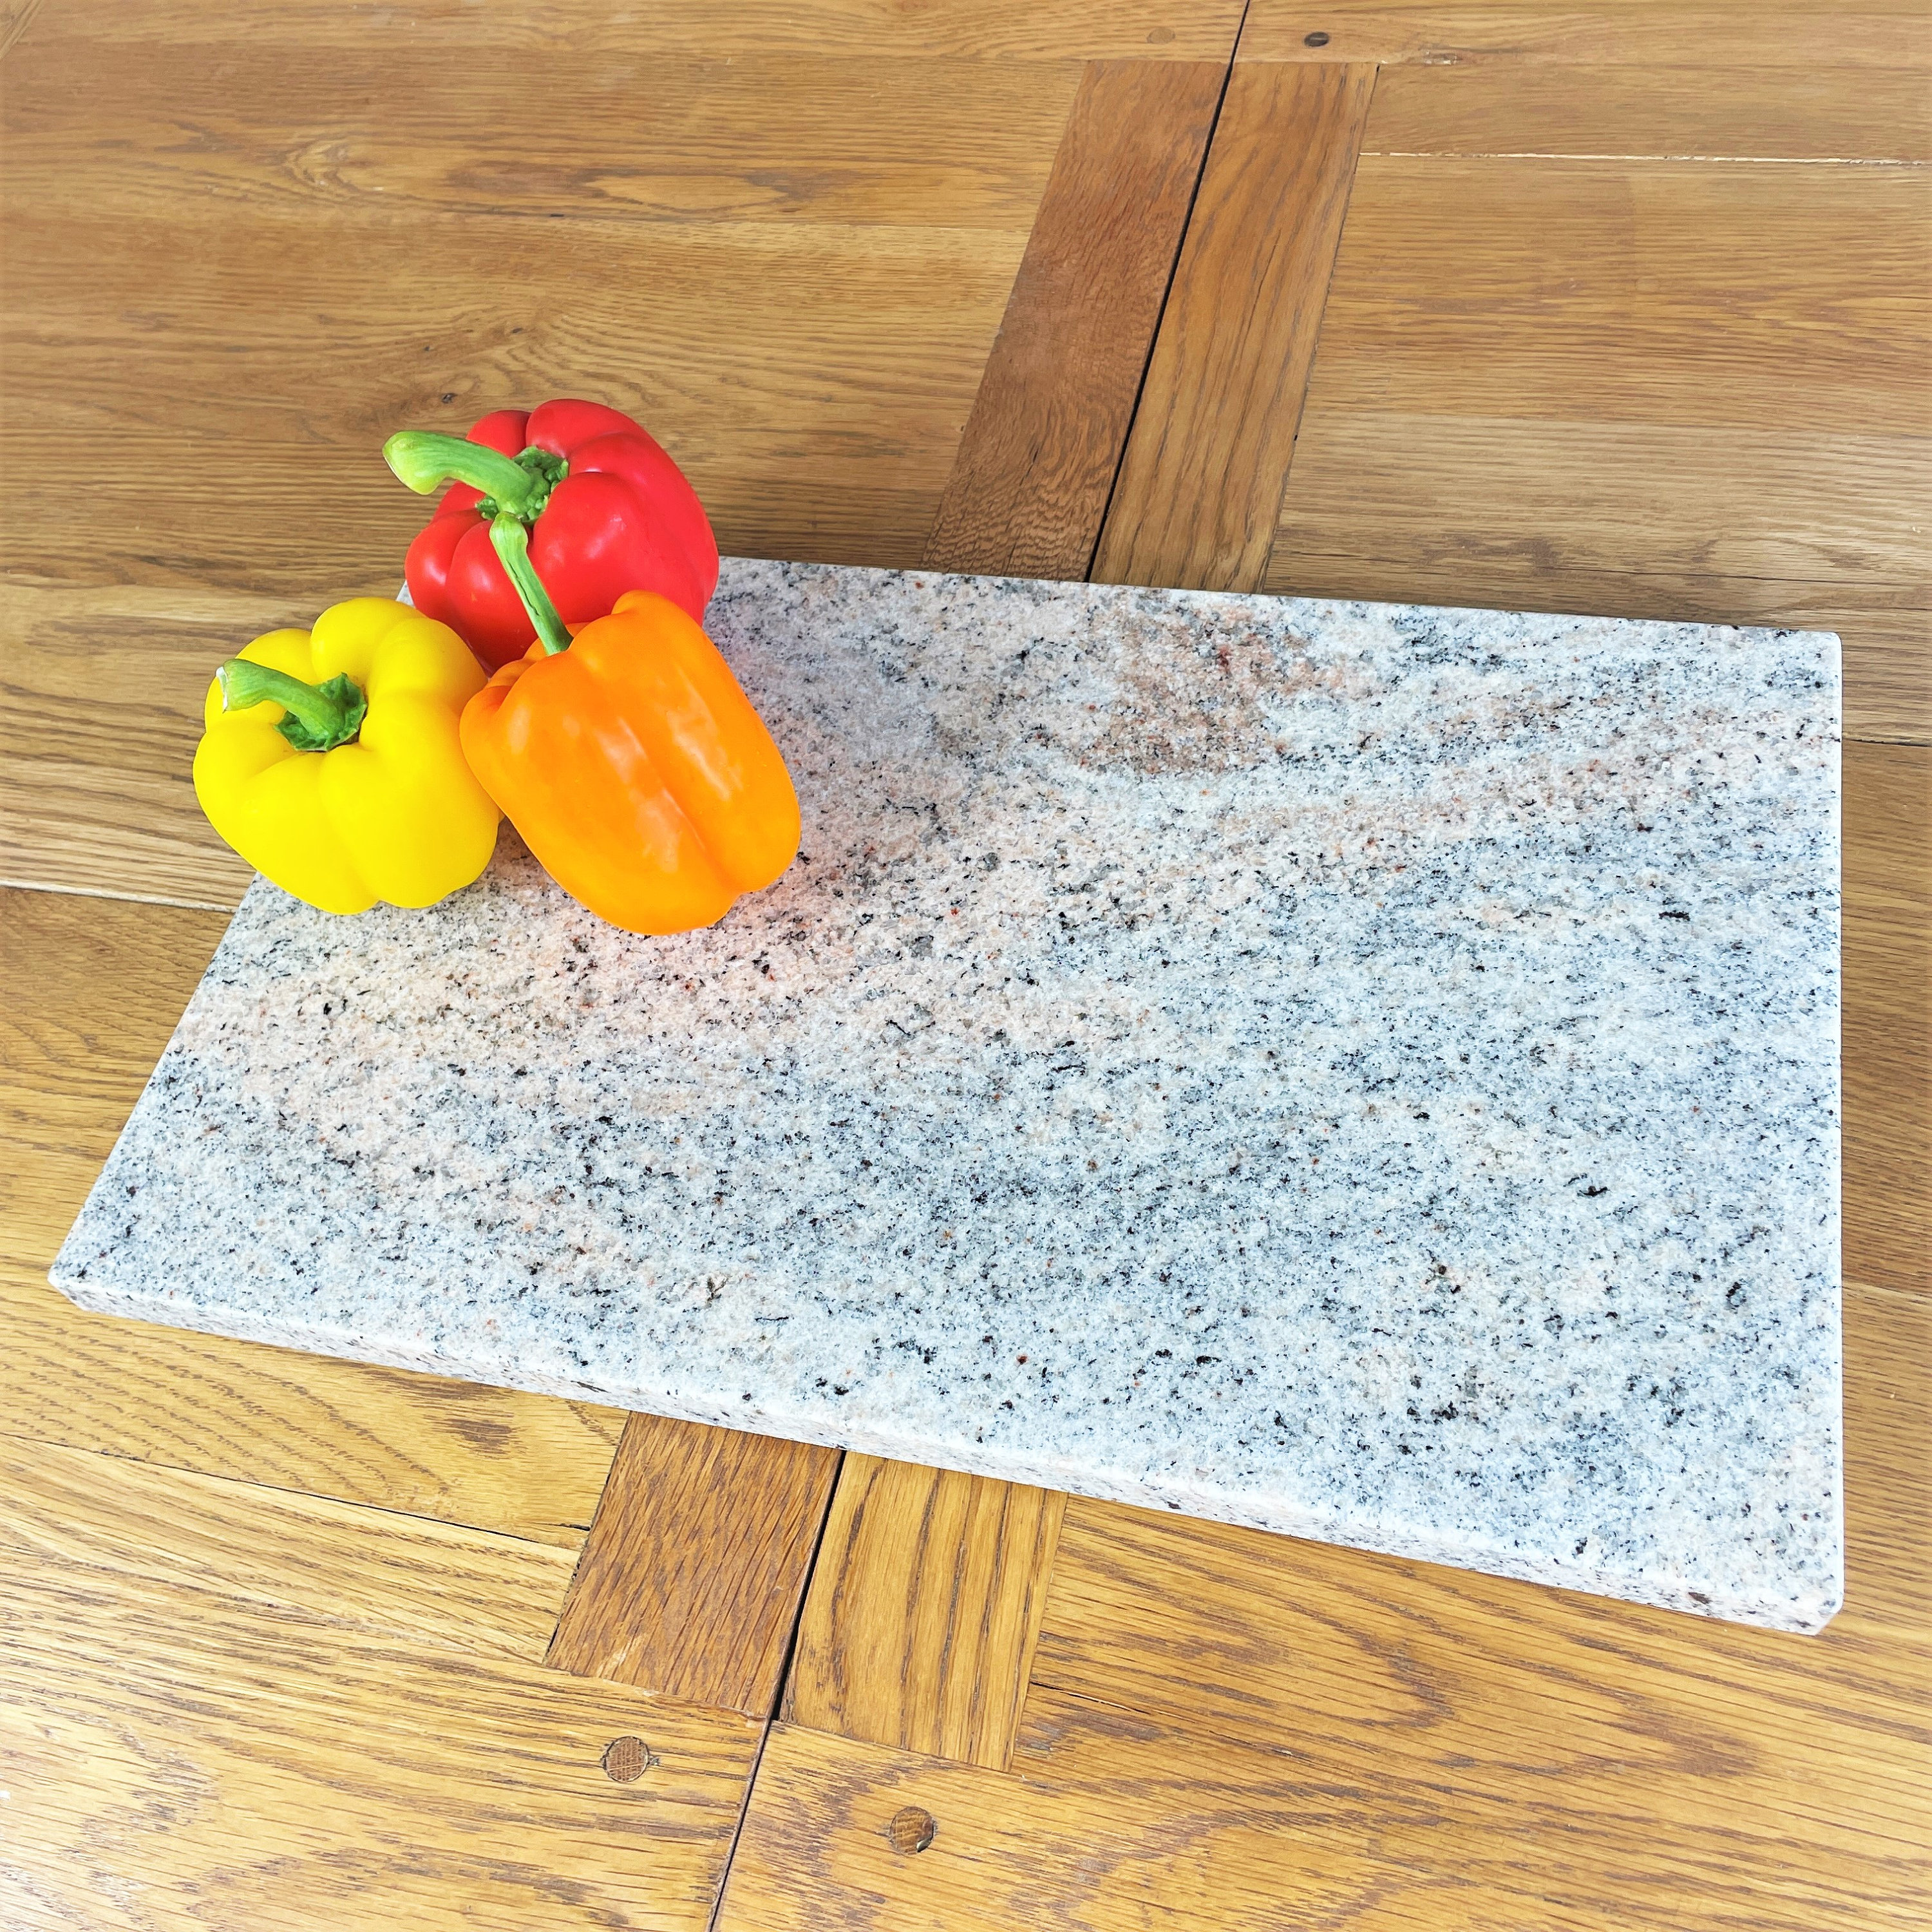 Are granite chopping boards good?